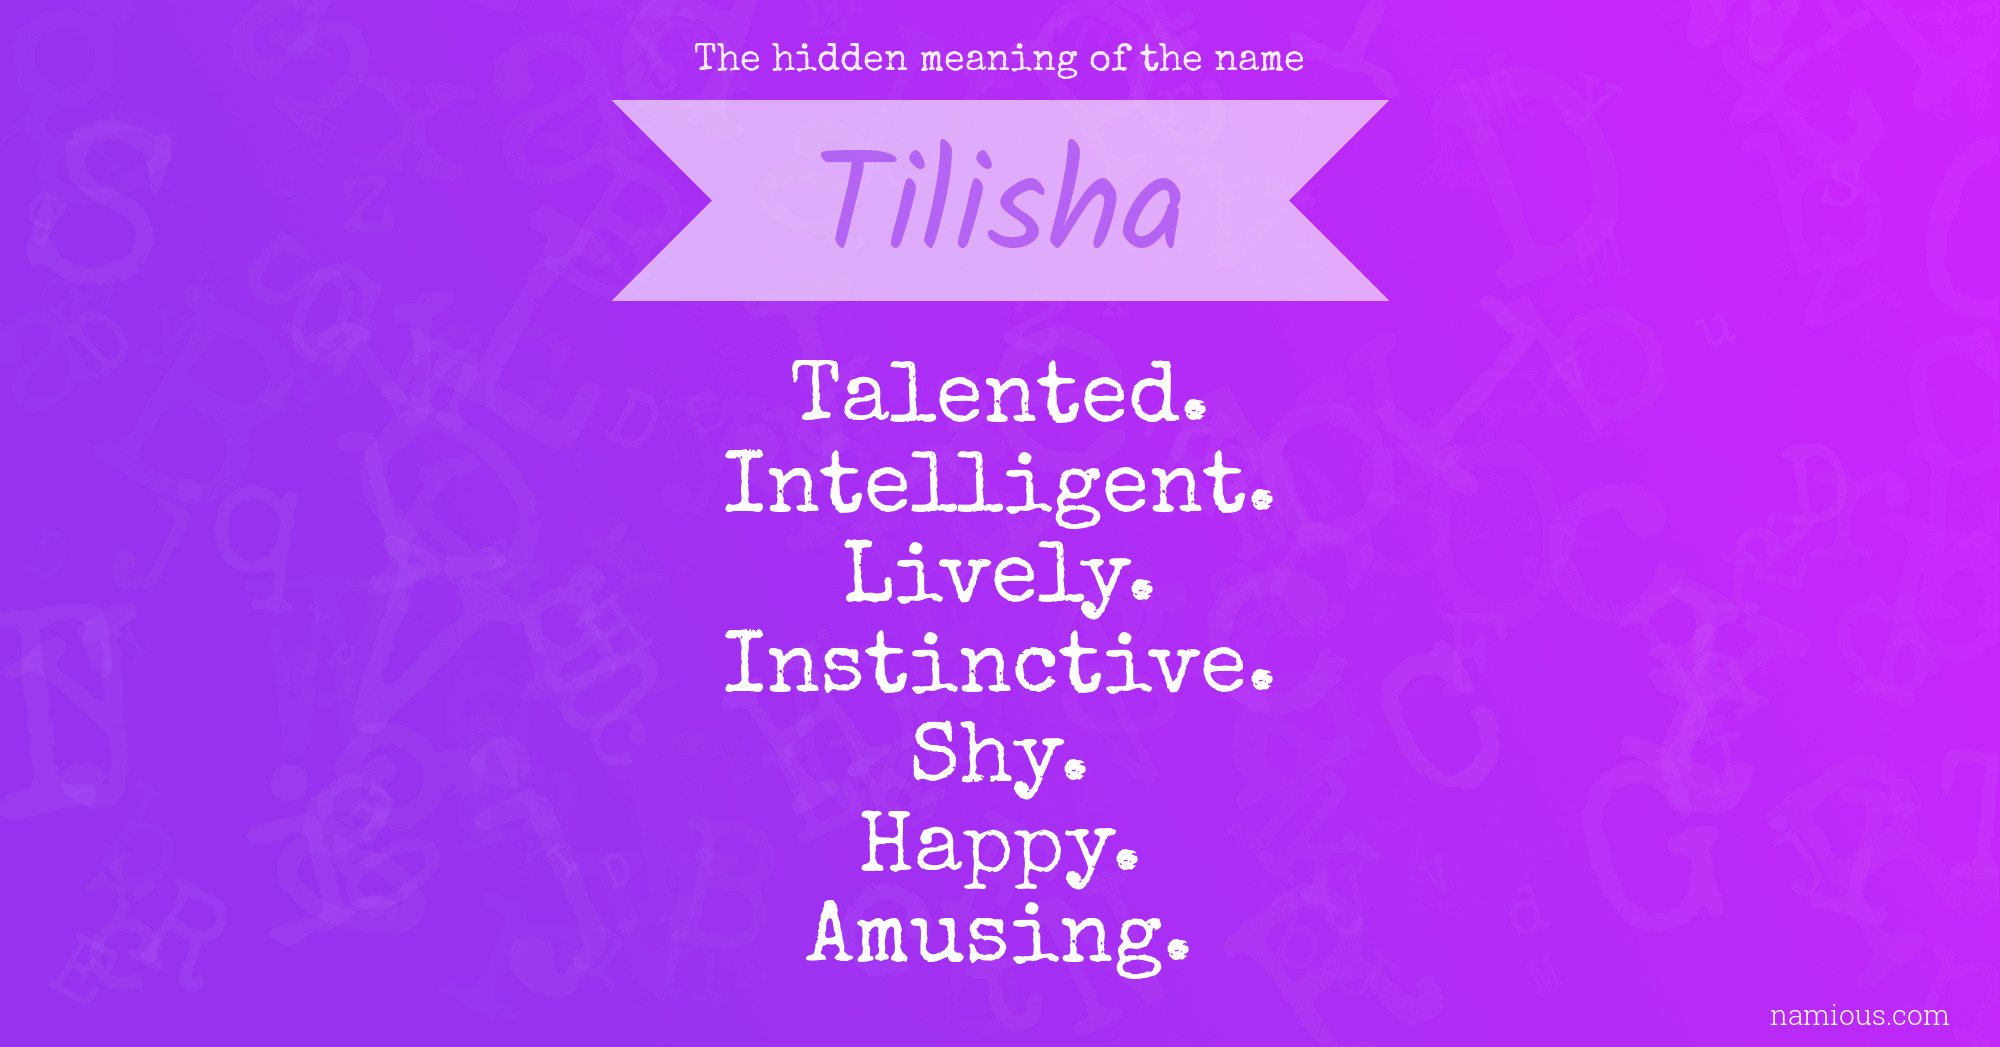 The hidden meaning of the name Tilisha